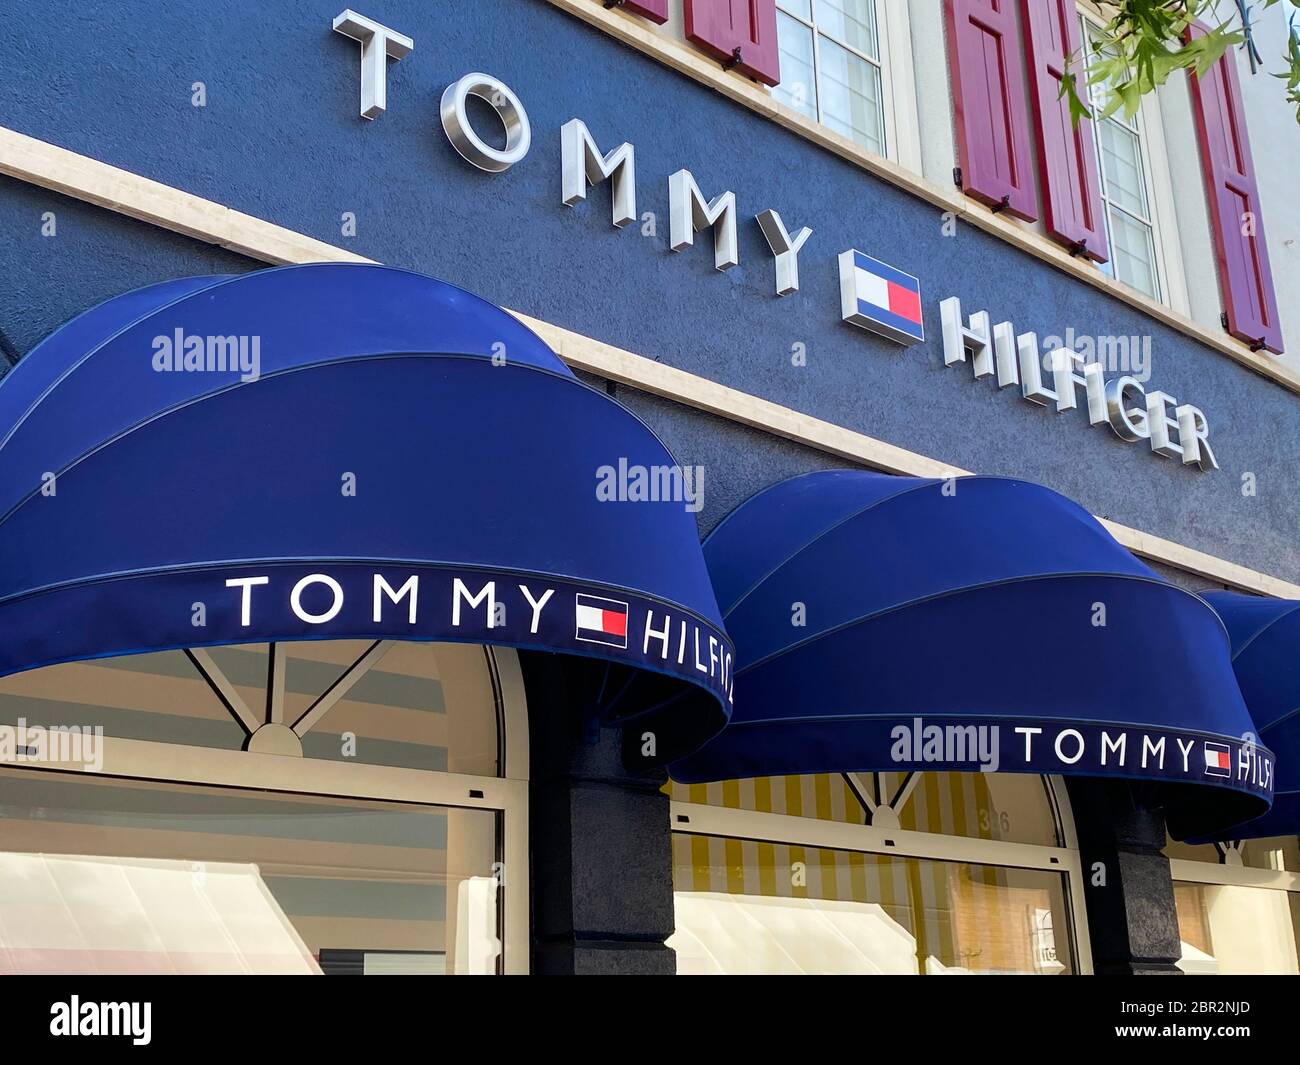 Roermond, Netherlands - May 19. 2020: View on facade with logo lettering of Tommy  Hilfiger fashion company at shop entrance Stock Photo - Alamy